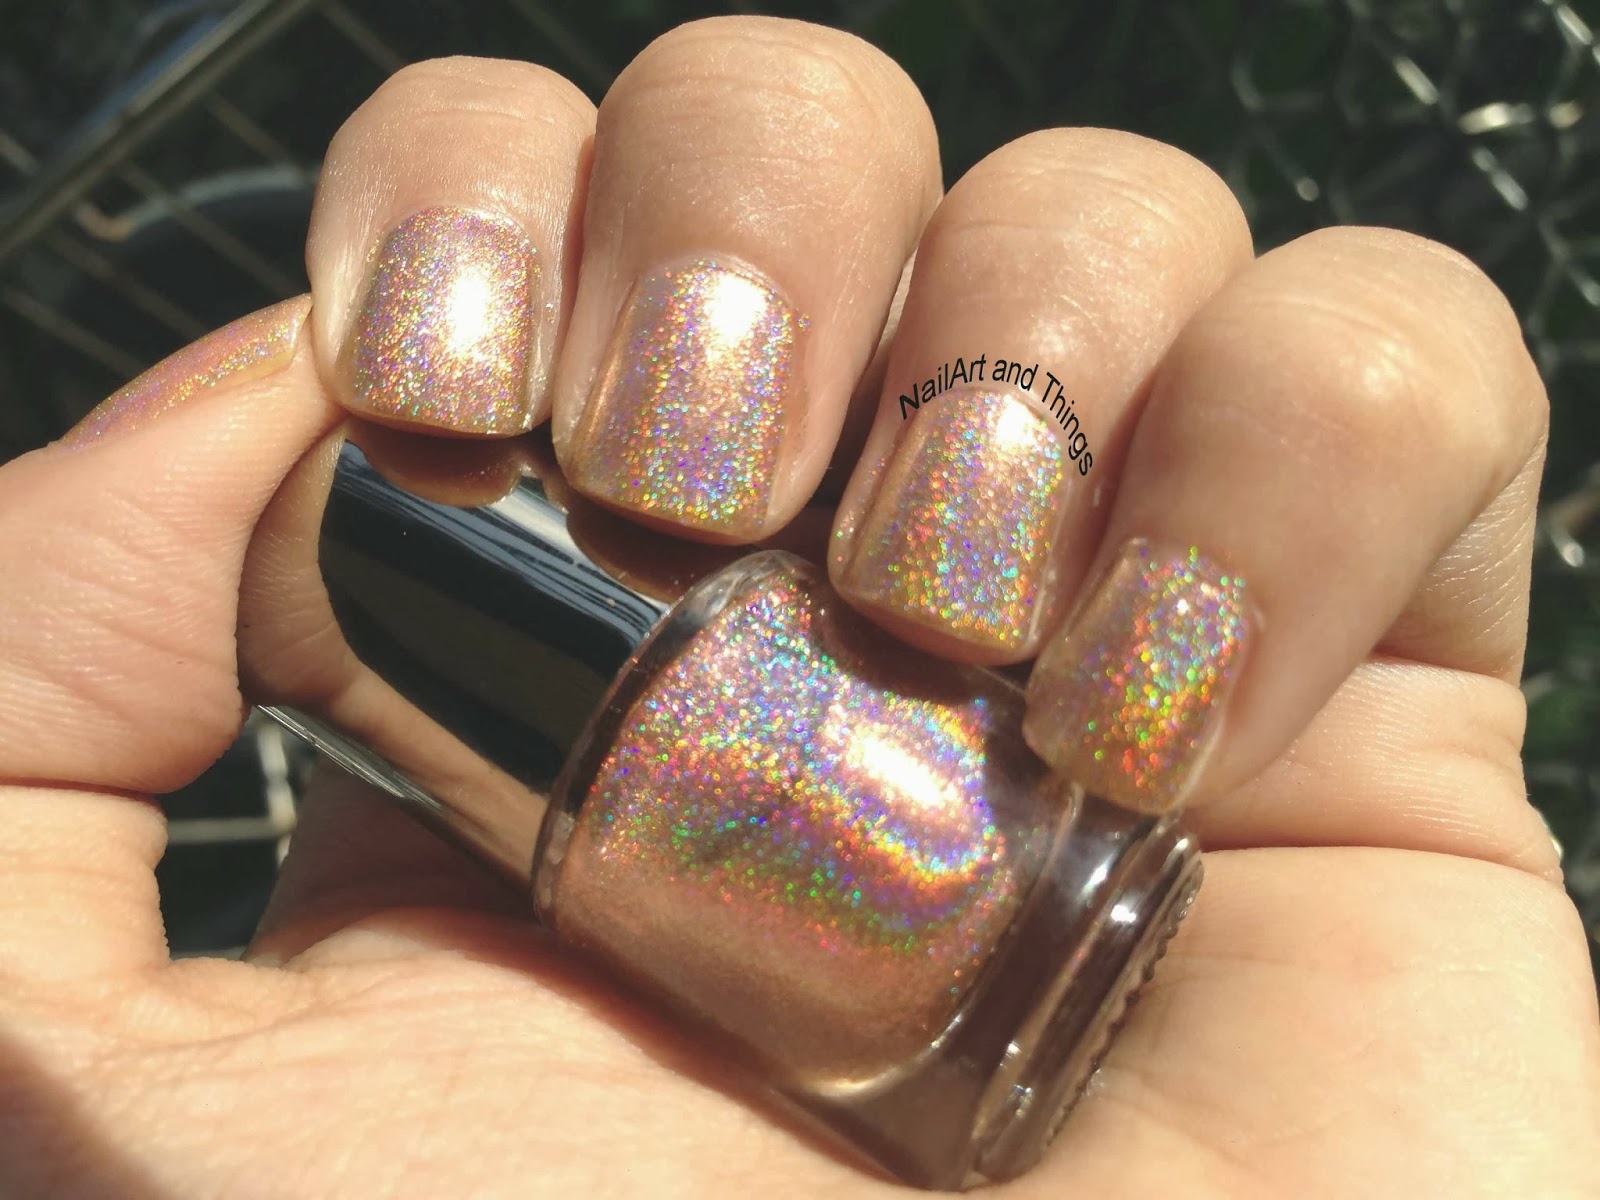 7. Holographic Nail Art - wide 5